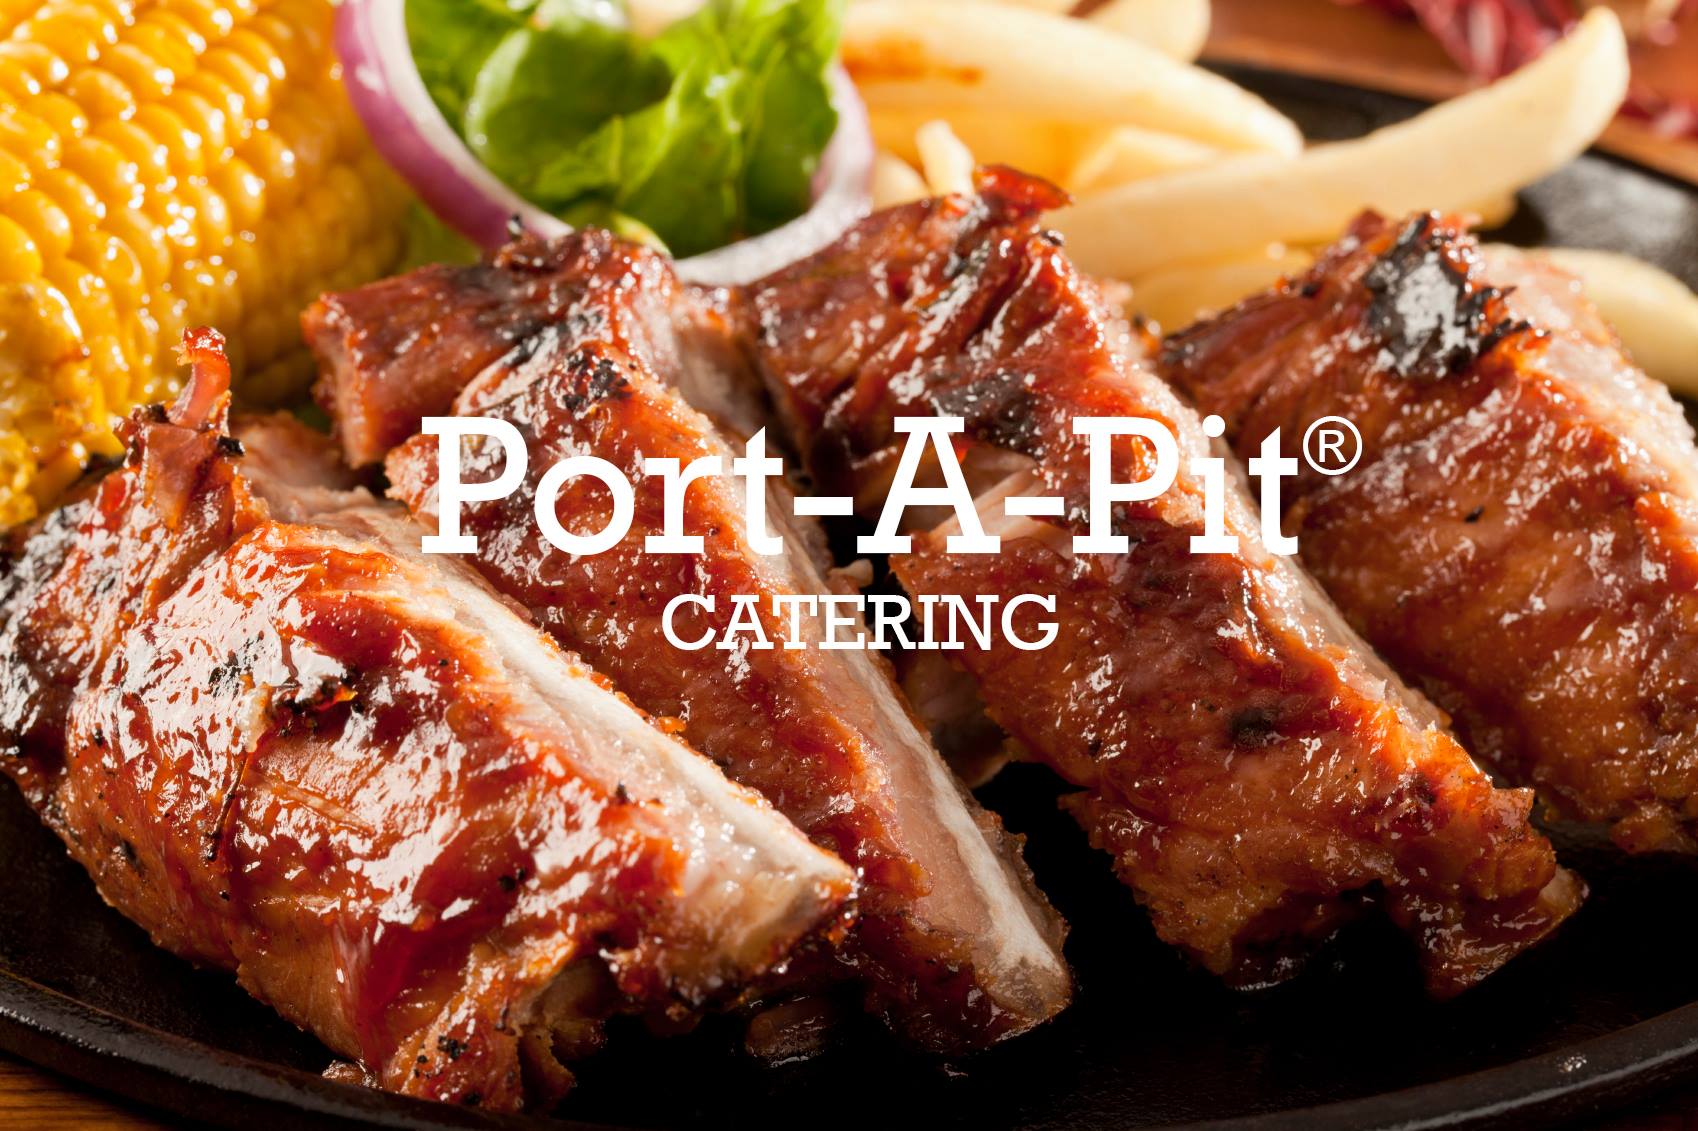 Port-A-Pit Catering